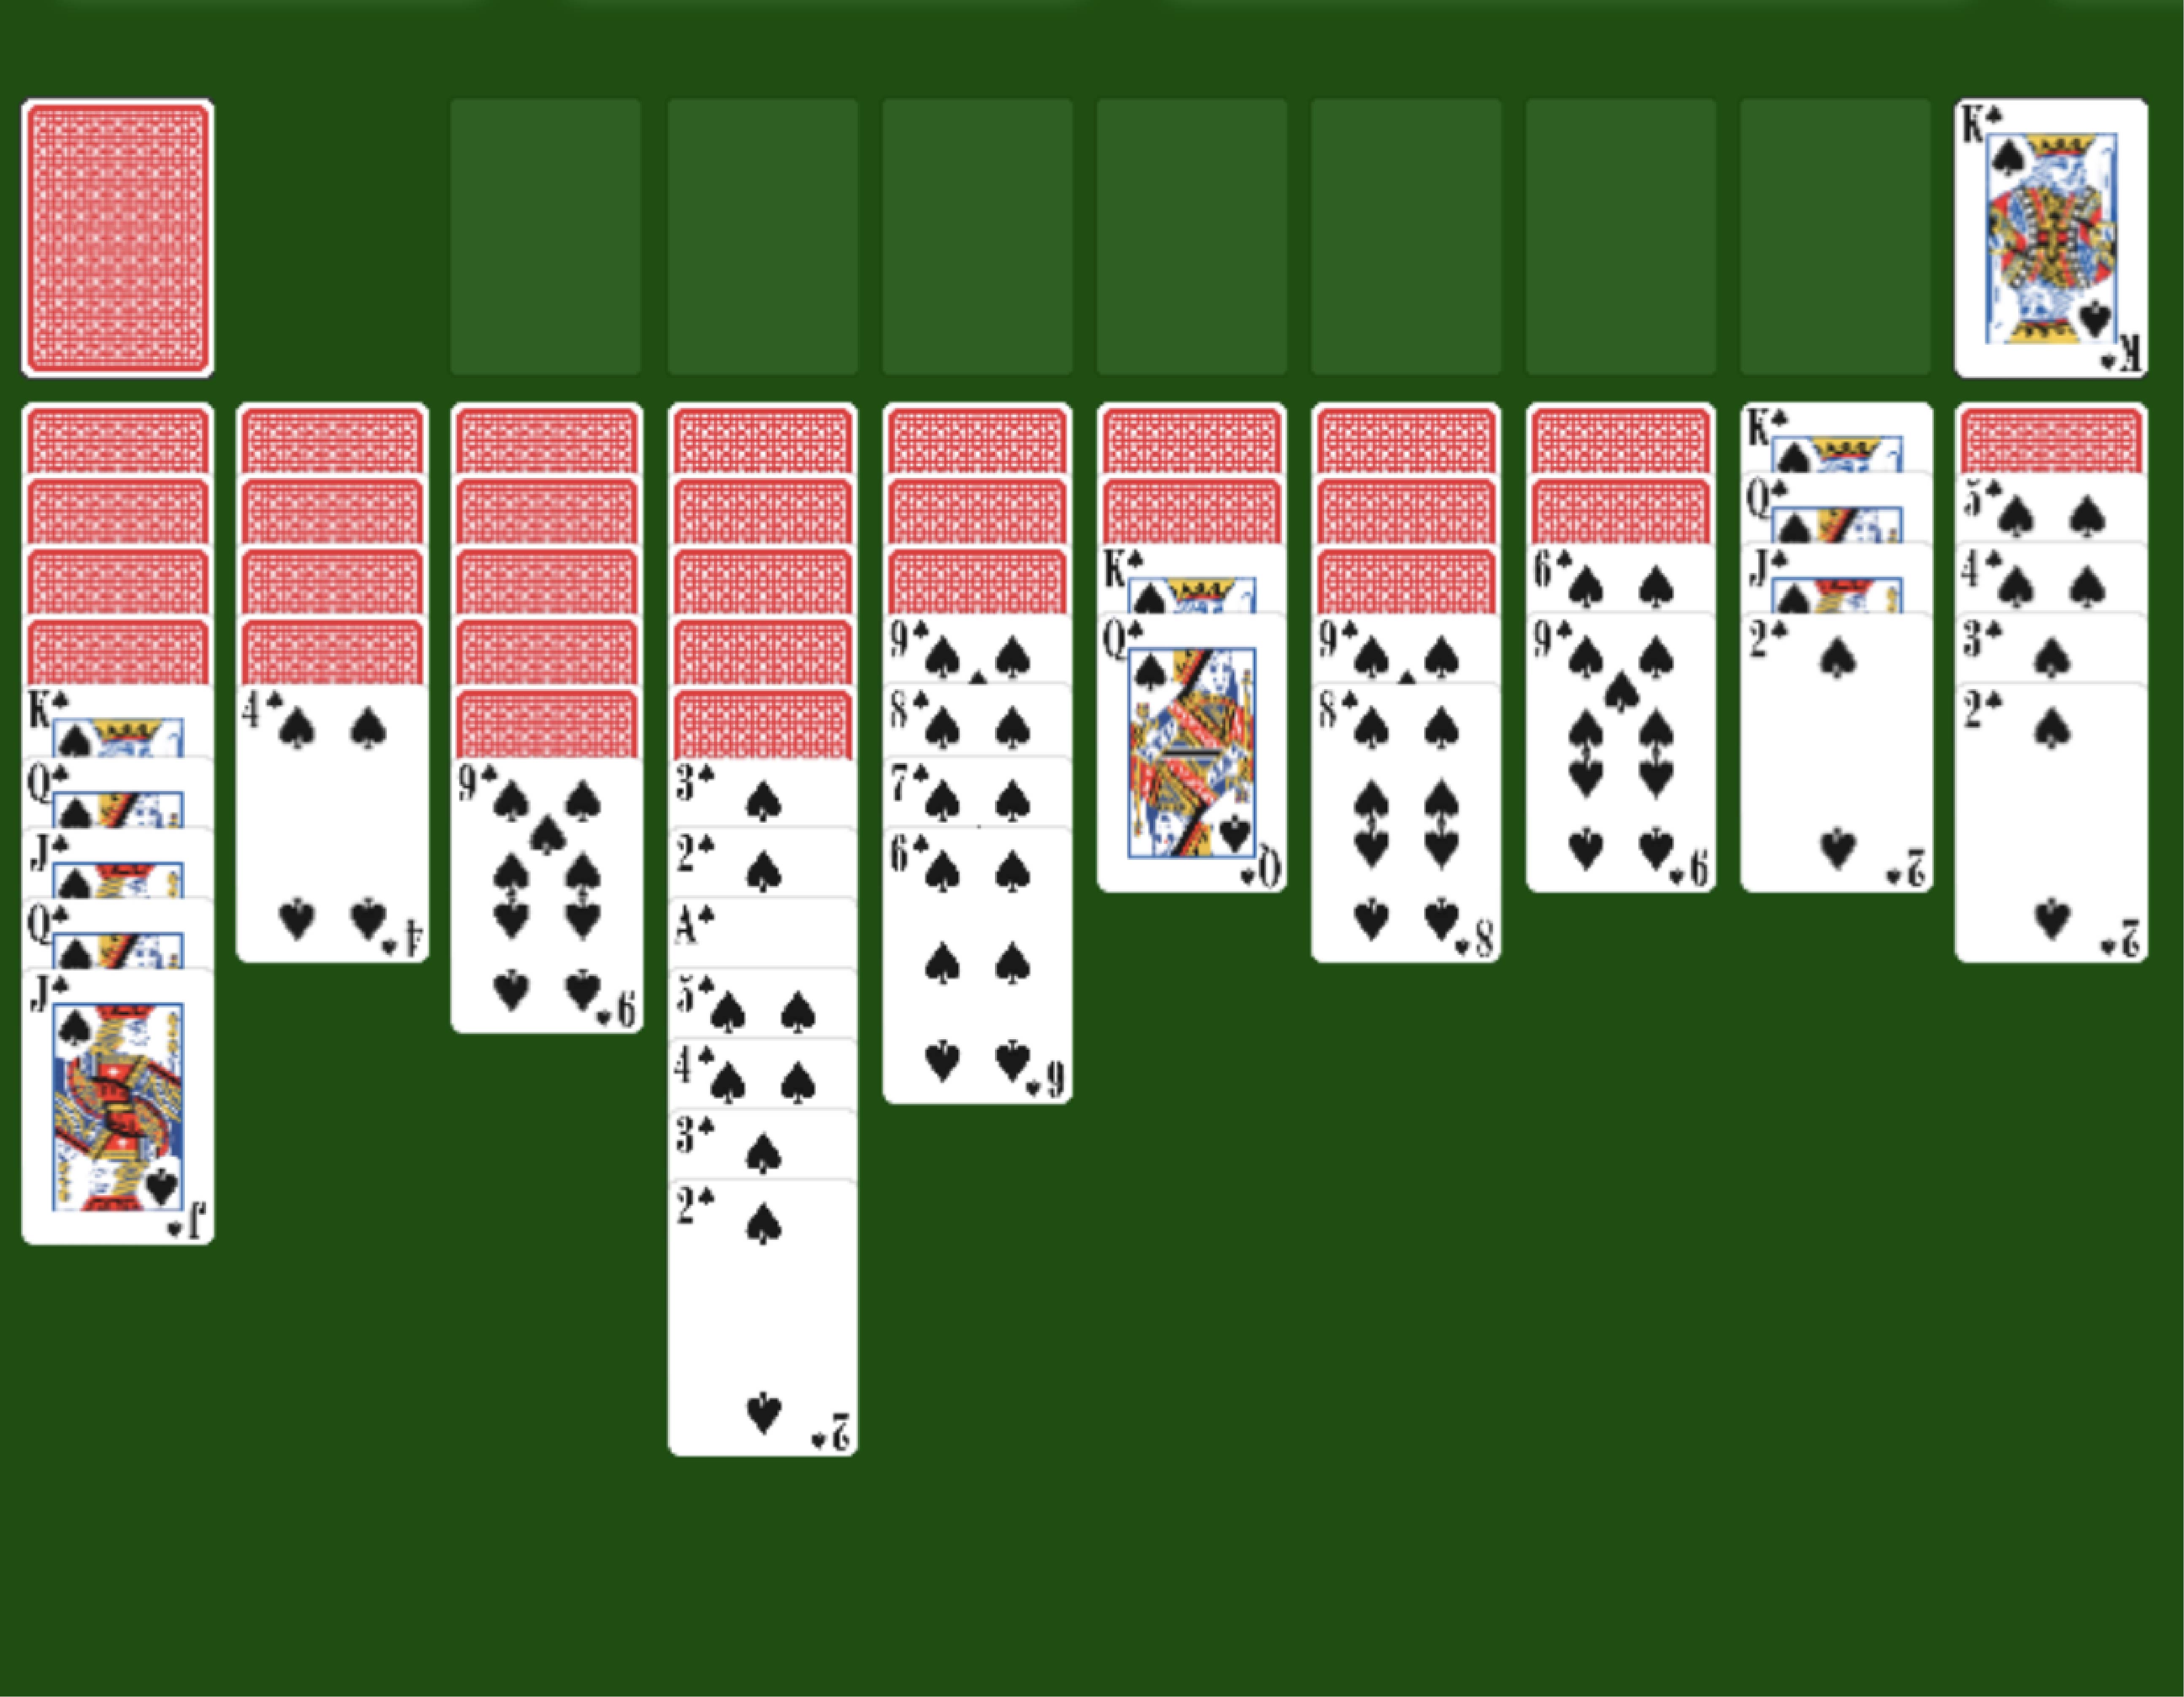 the original game of spider solitaire